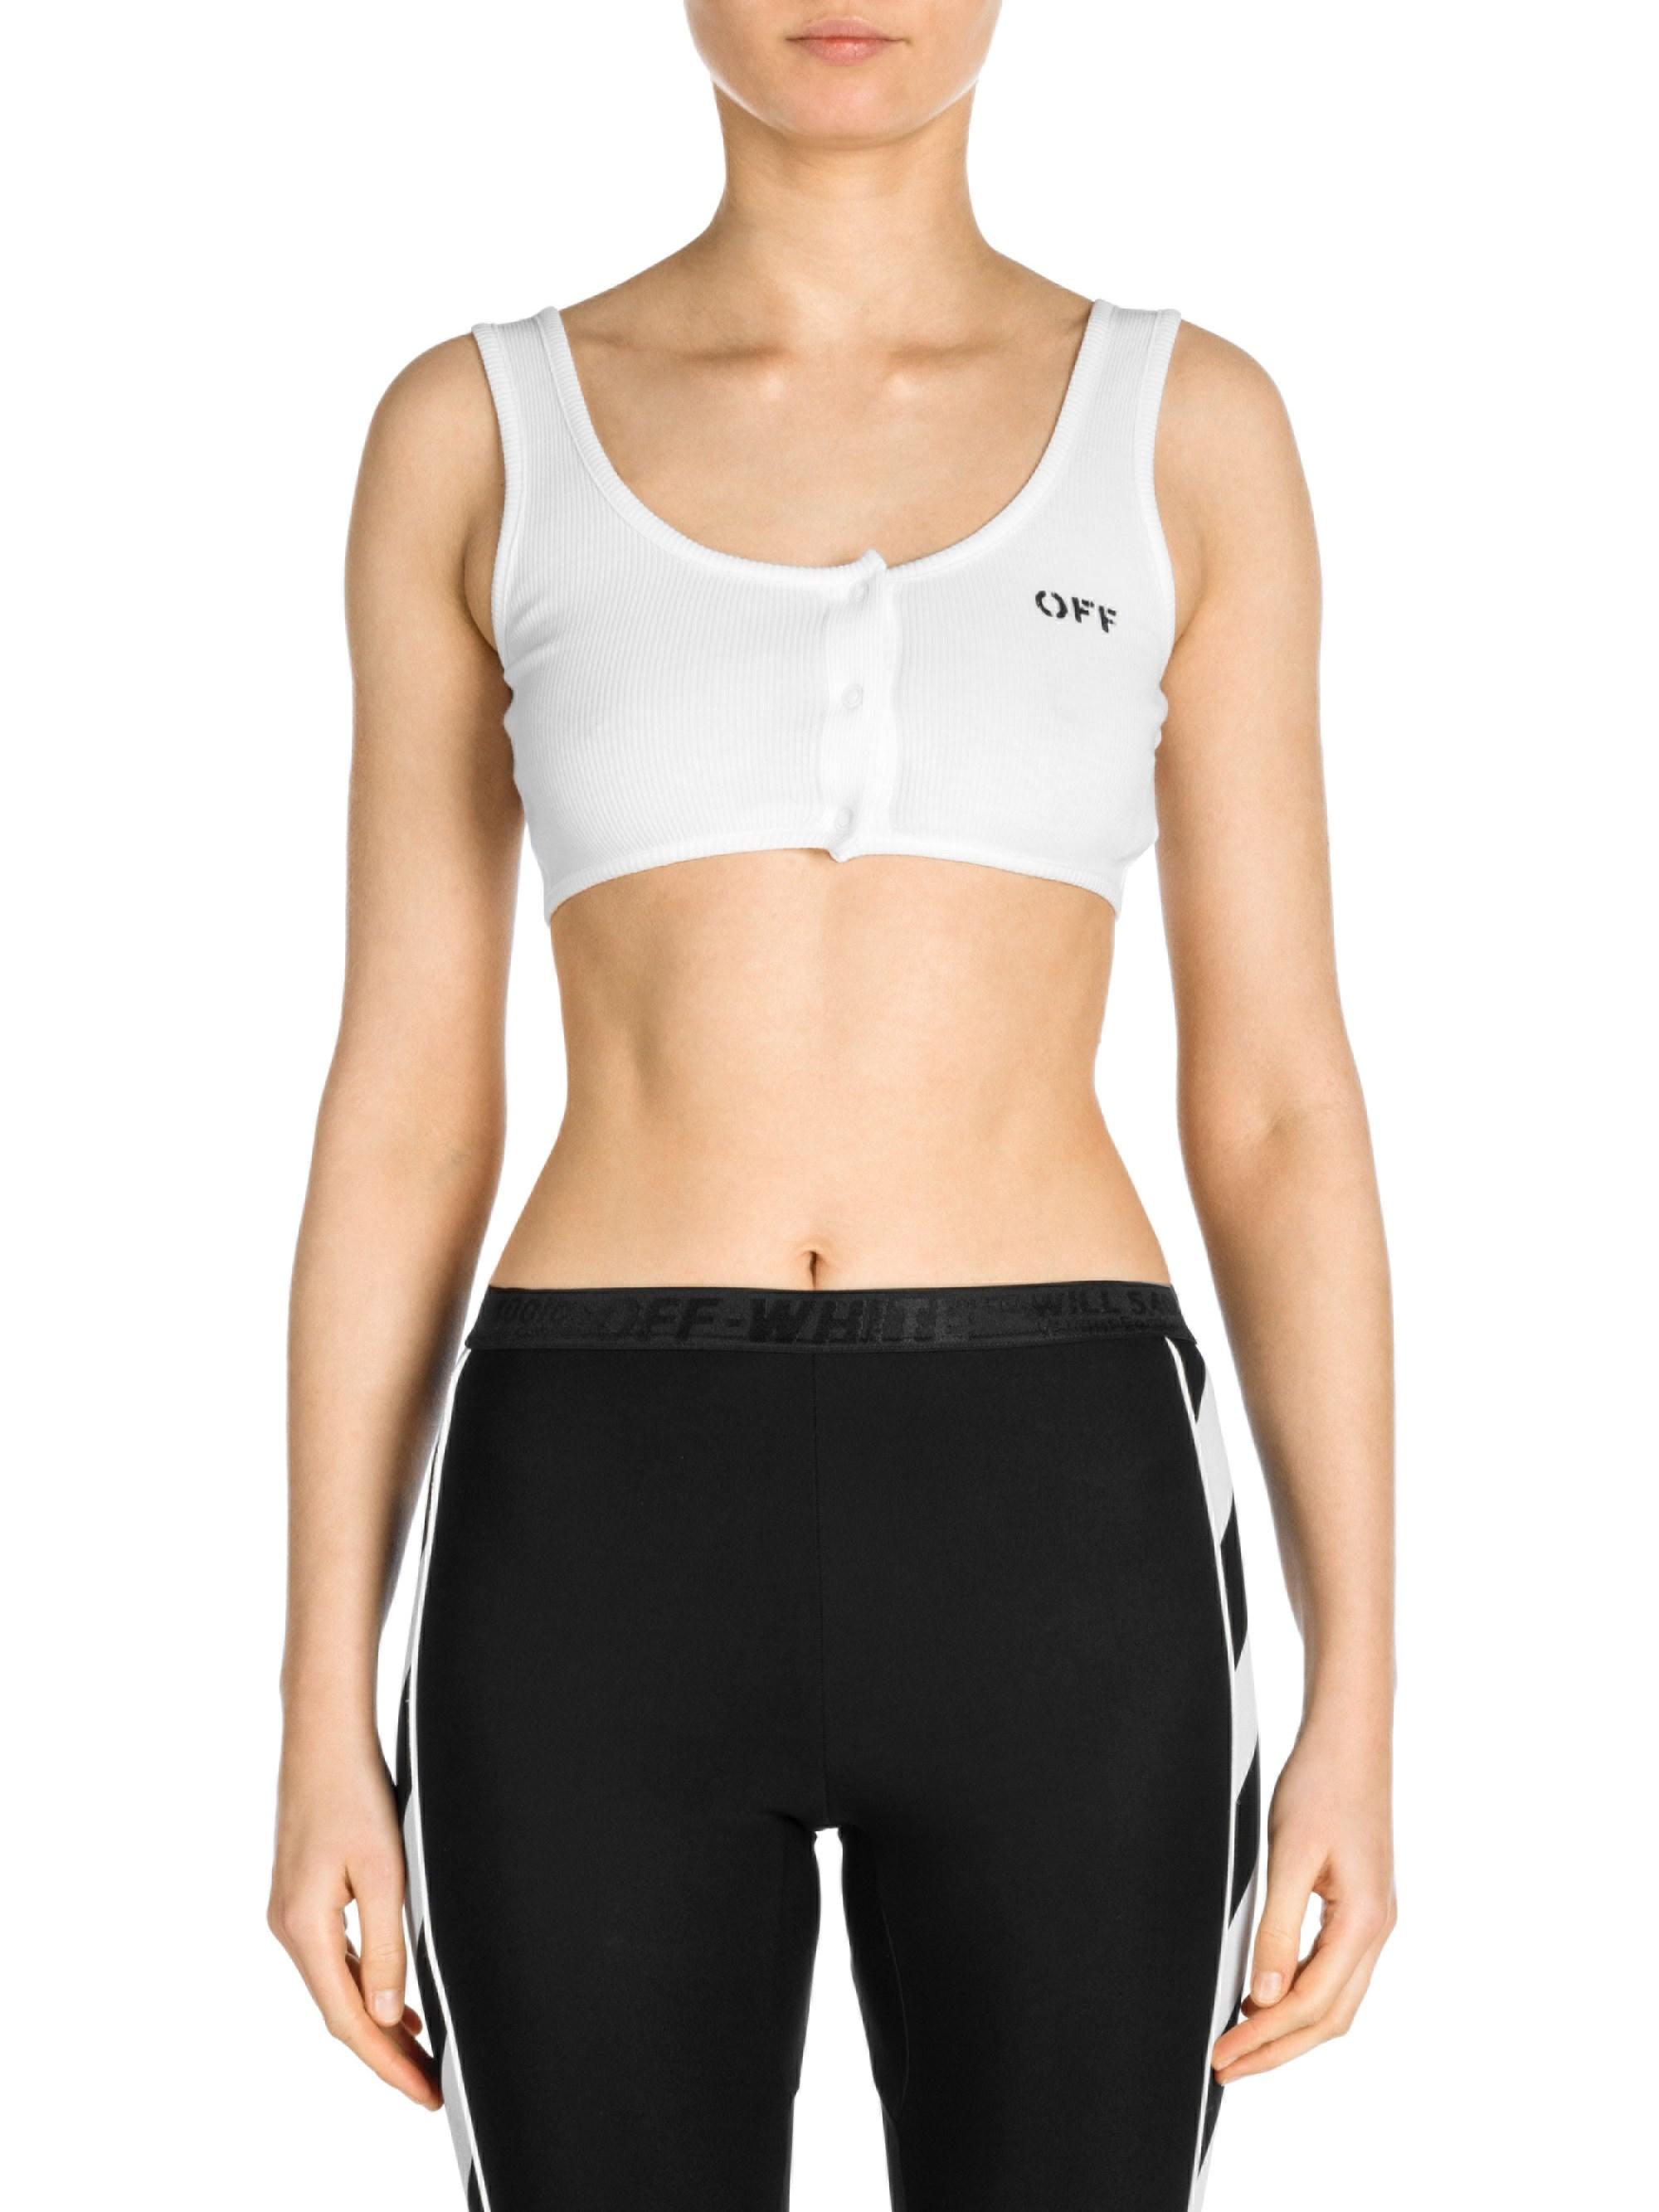 Off-White c/o Virgil Abloh Buttoned Sports Bra in Black - Lyst